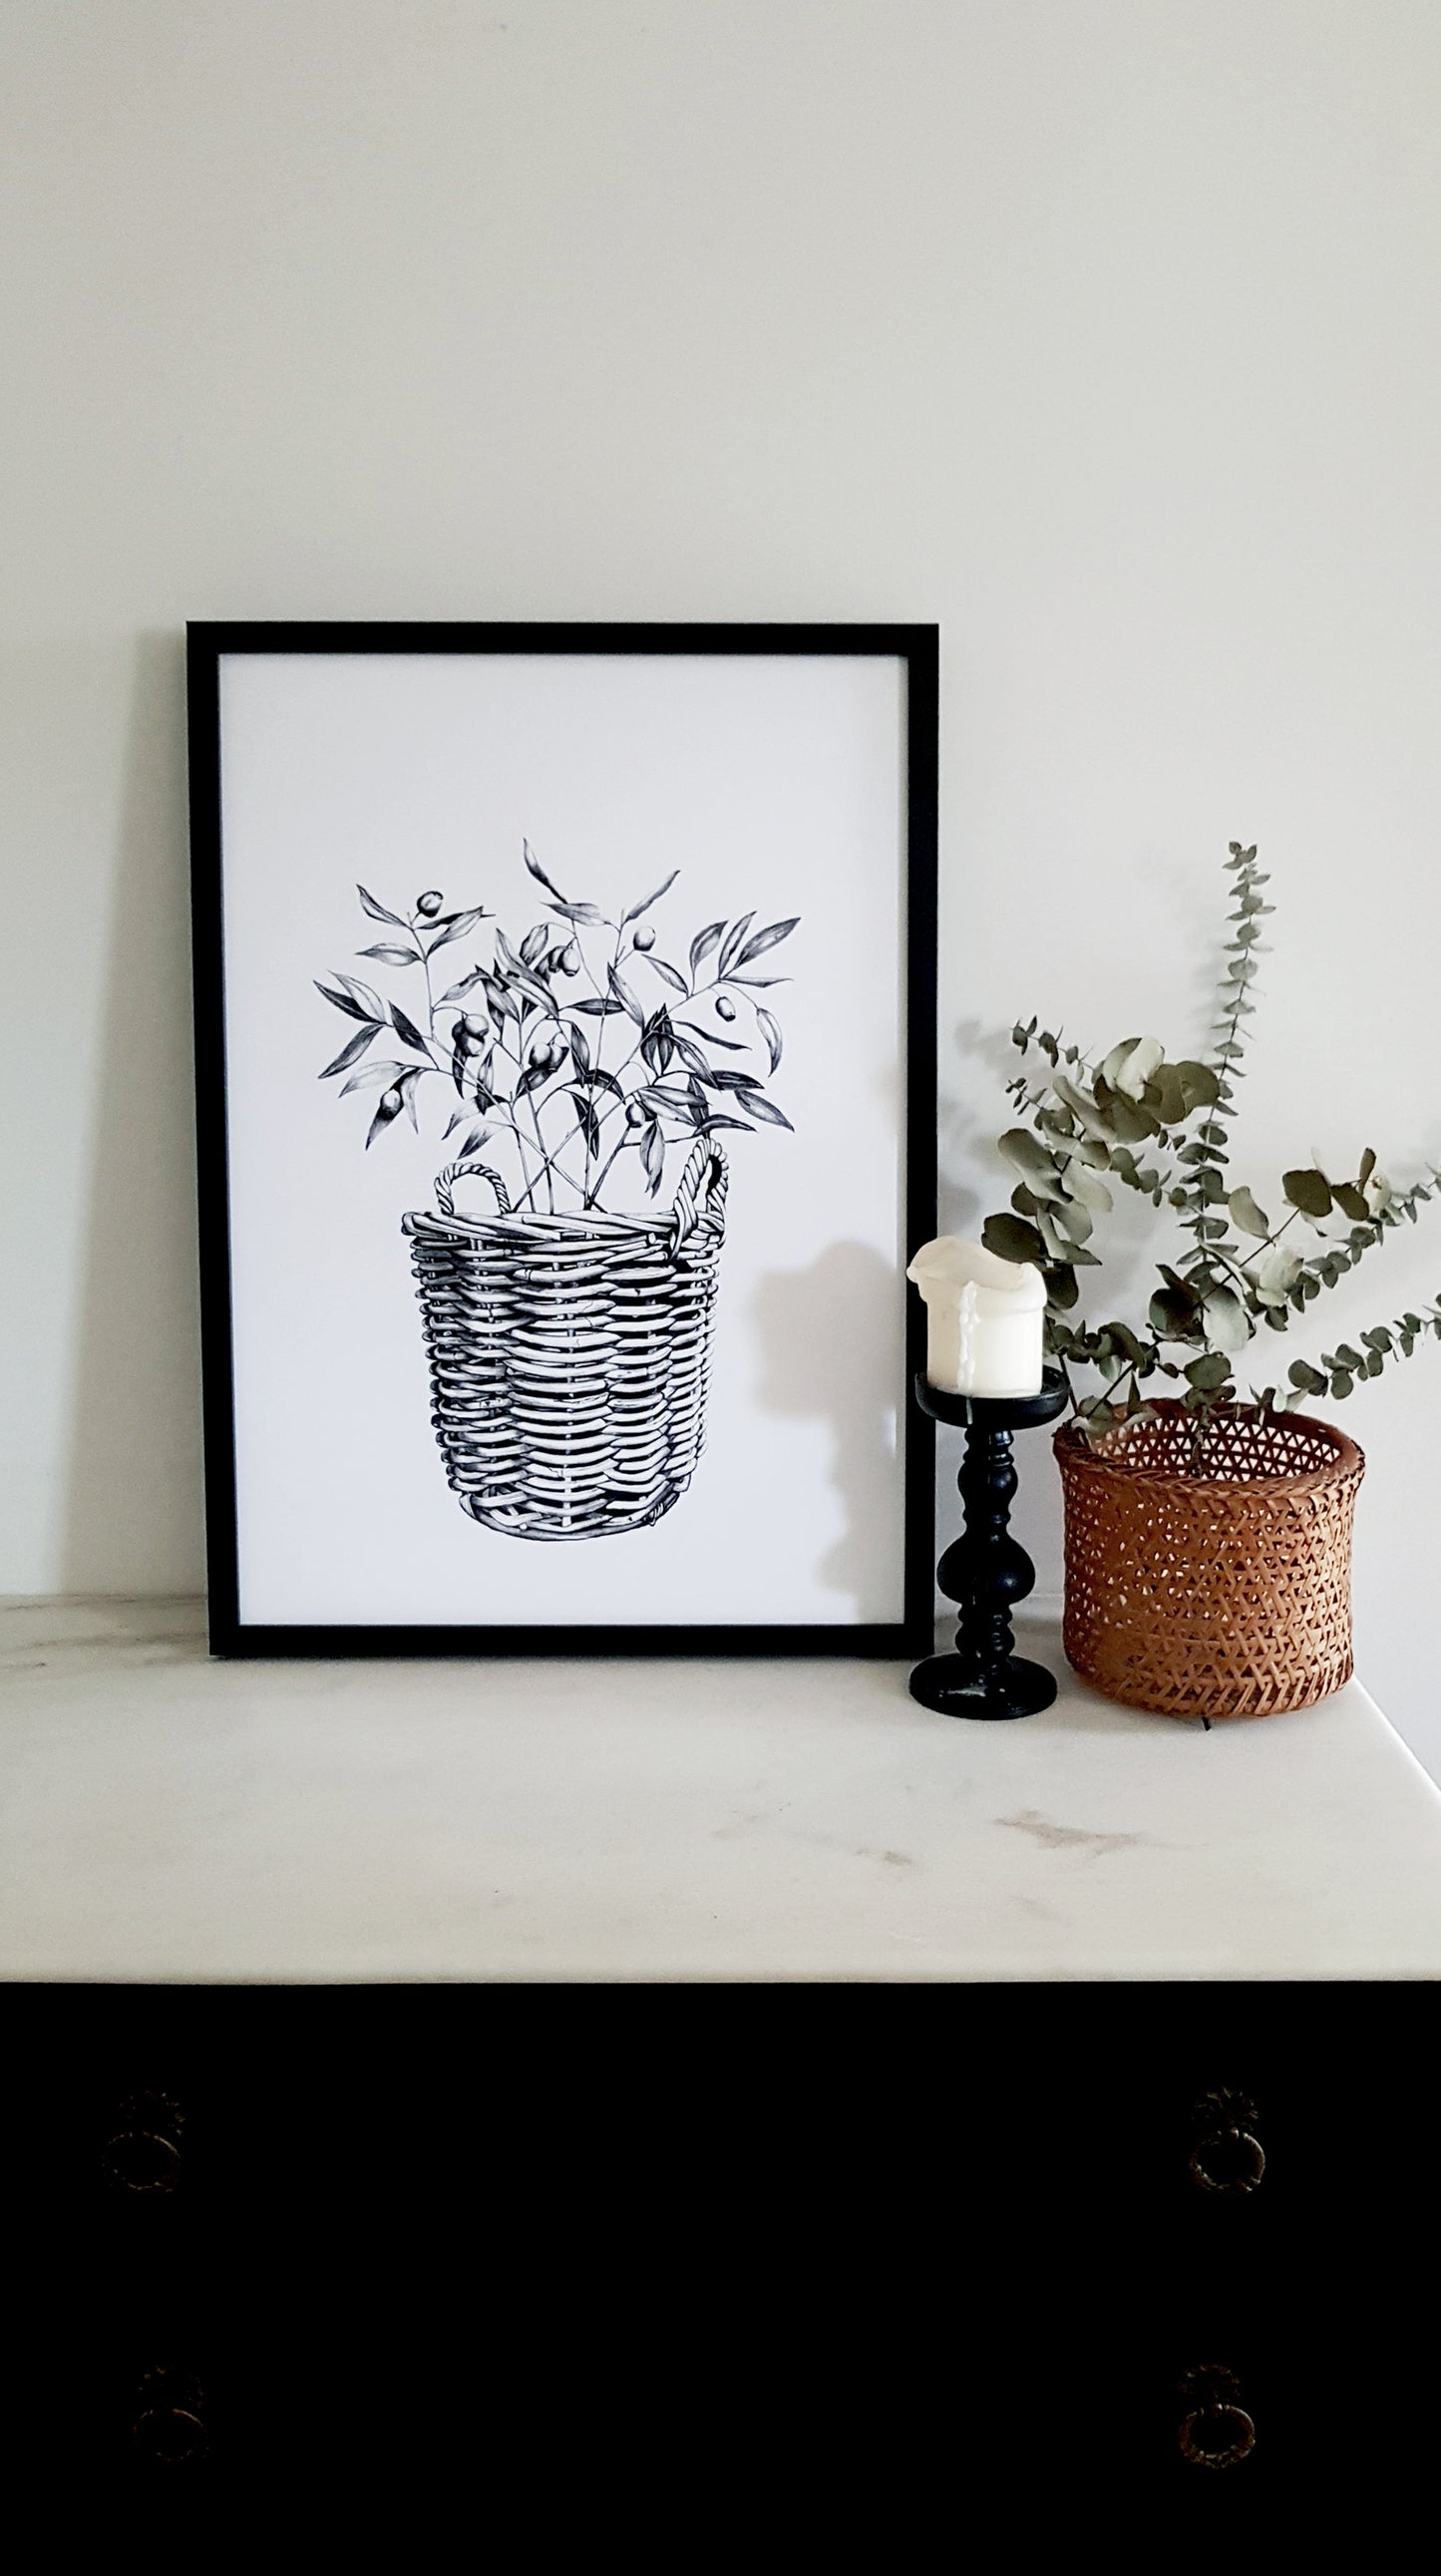 Hand drawn using pencil, in meticulous details with gum leaves inside the basket, art print in black frame